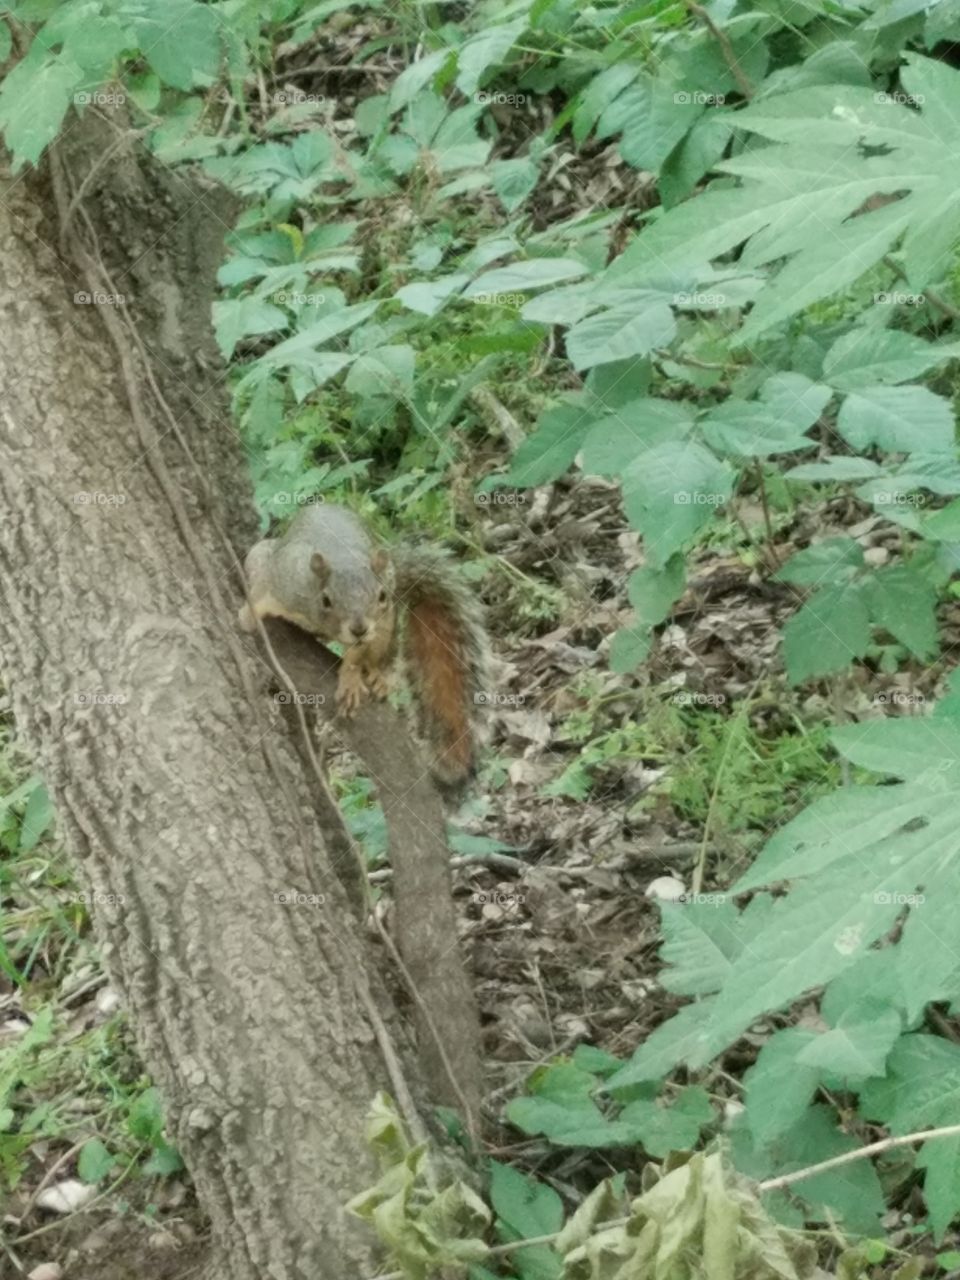 squirrel looking at me